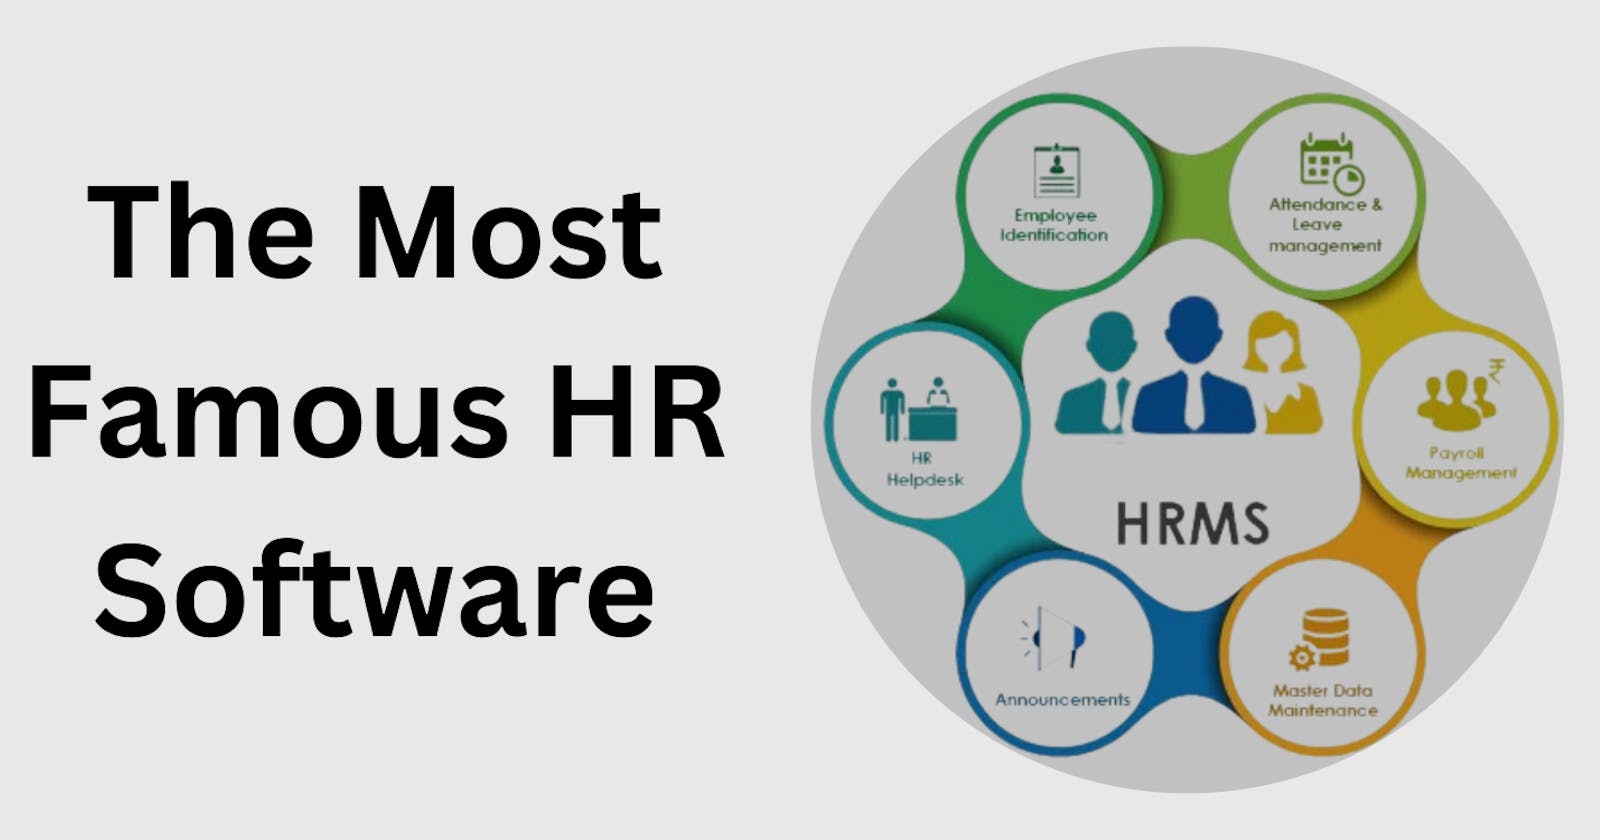 What is the most famous HR software?